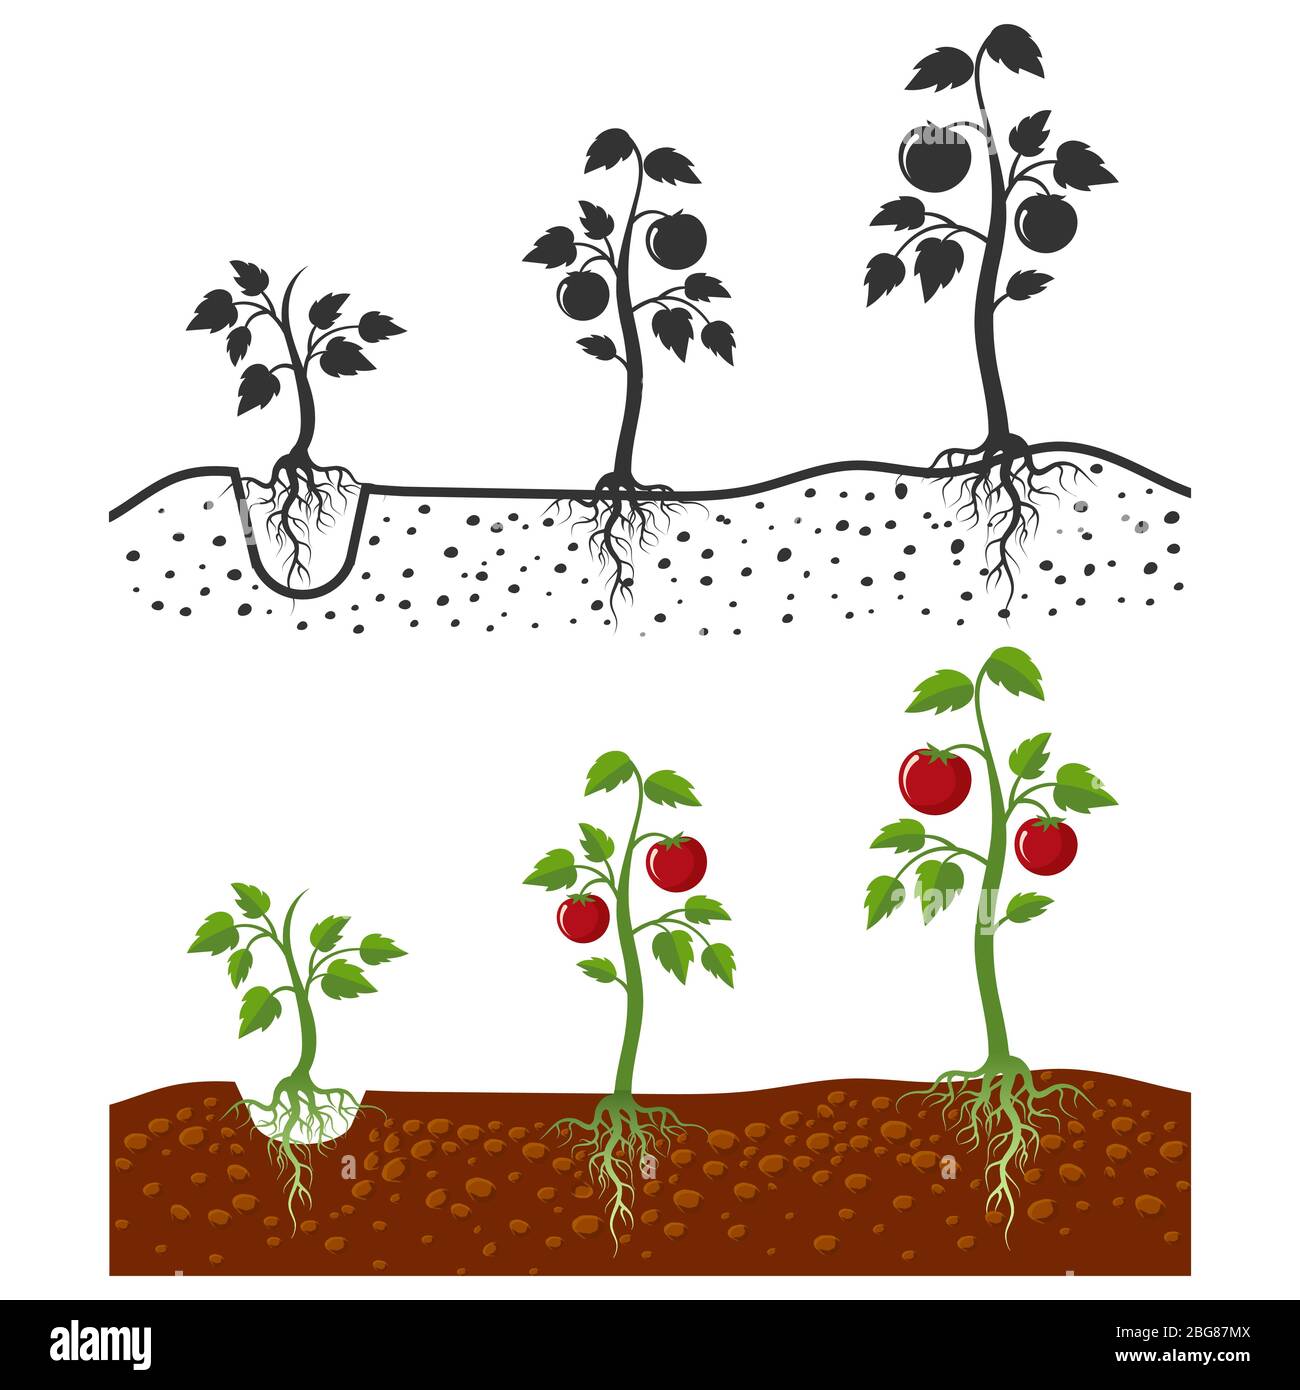 Tomato plant with roots vector growing stages - cartoon style and silhouettes of tomatoes isolated on white background. Vegetable tomato growing, agriculture sprout illustration Stock Vector